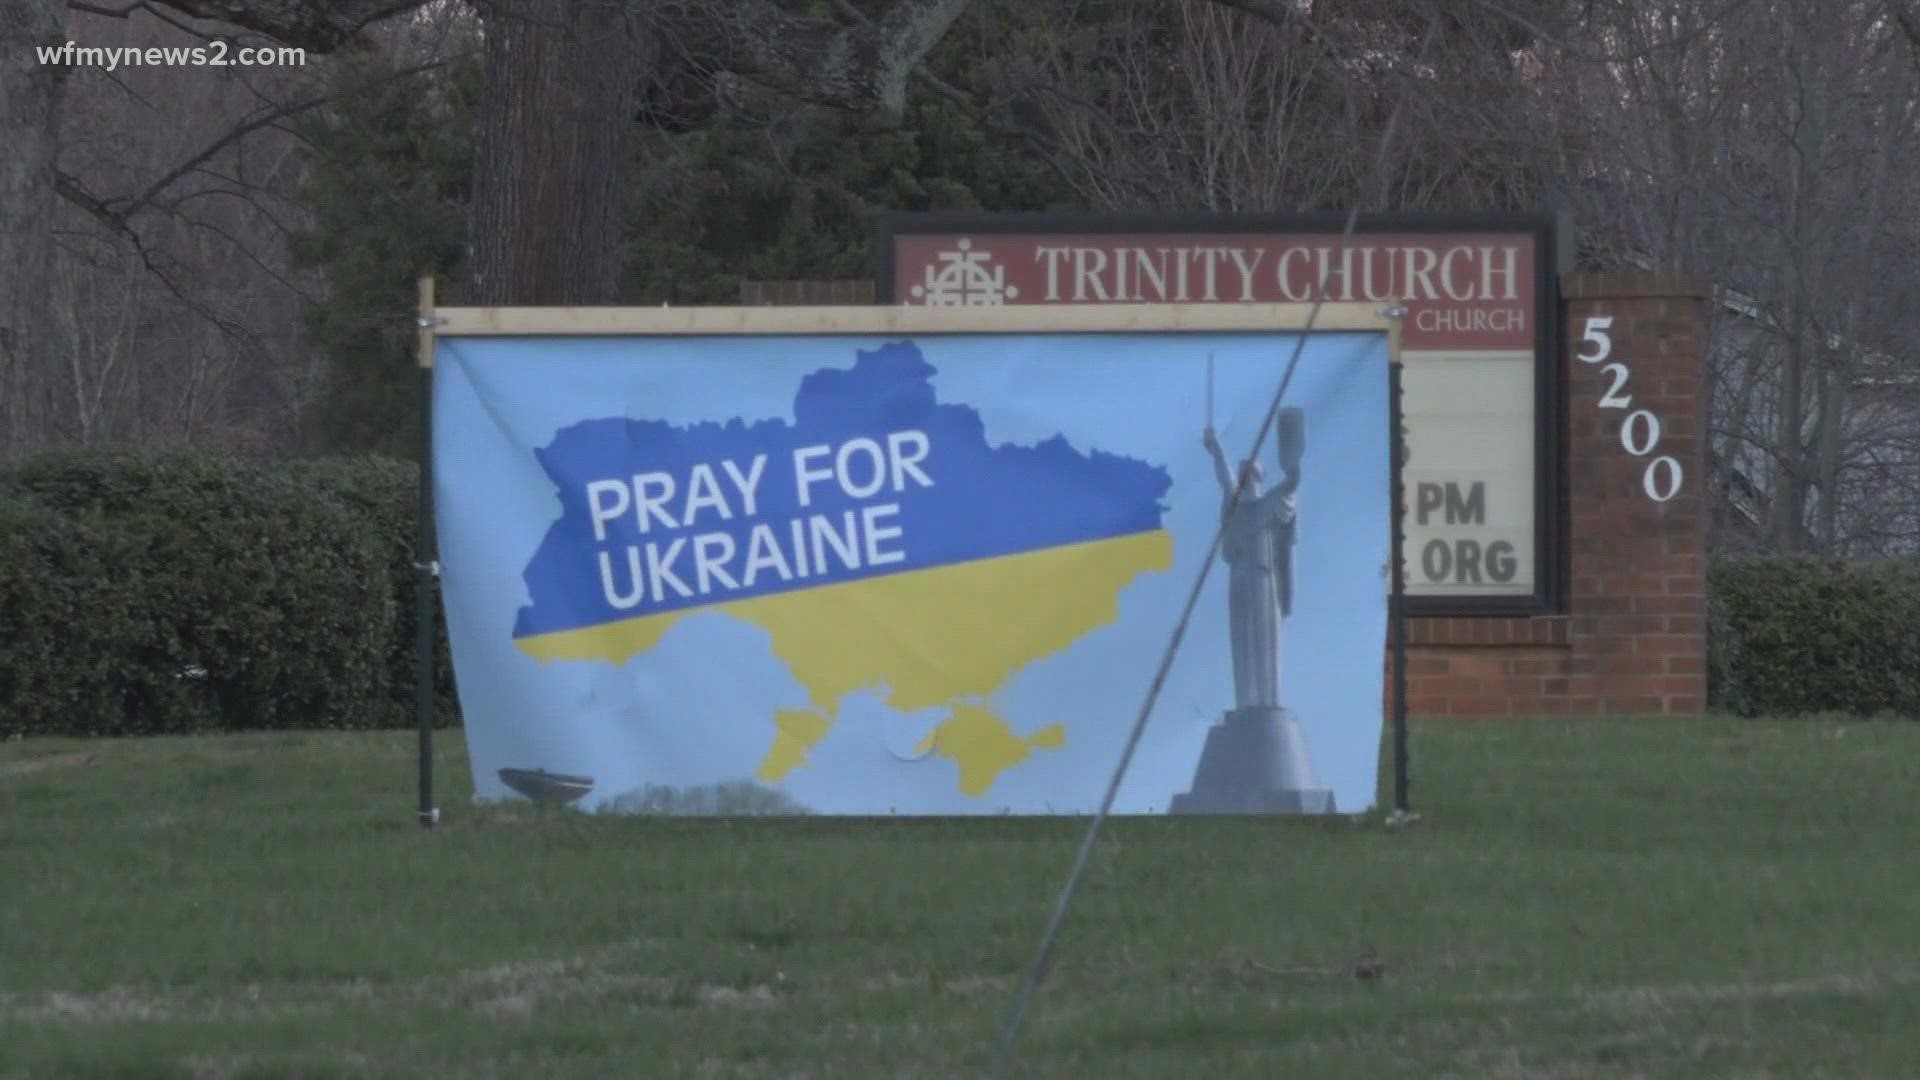 Living Water Church only has 26 members in its congregation, but when they asked the community to help Ukraine – hundreds stepped up.